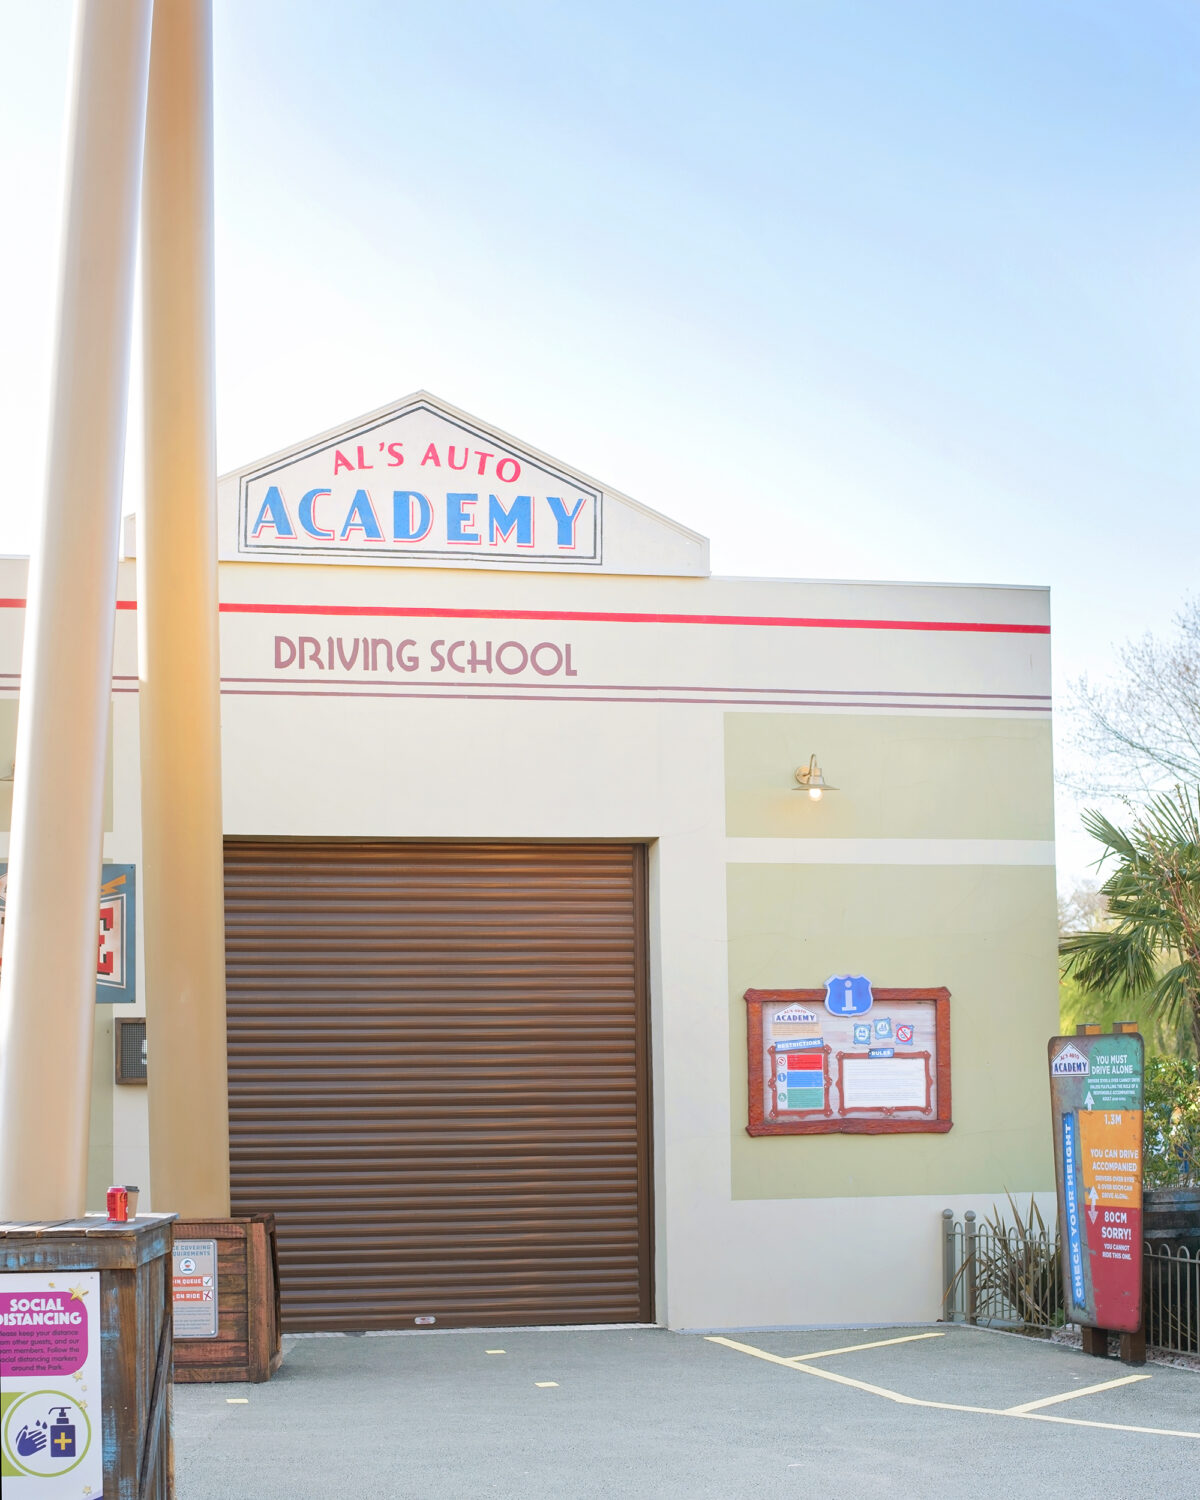  Image shows the building for Al's Auto Academy Driving School at Tornado Springs in Paultons Park.